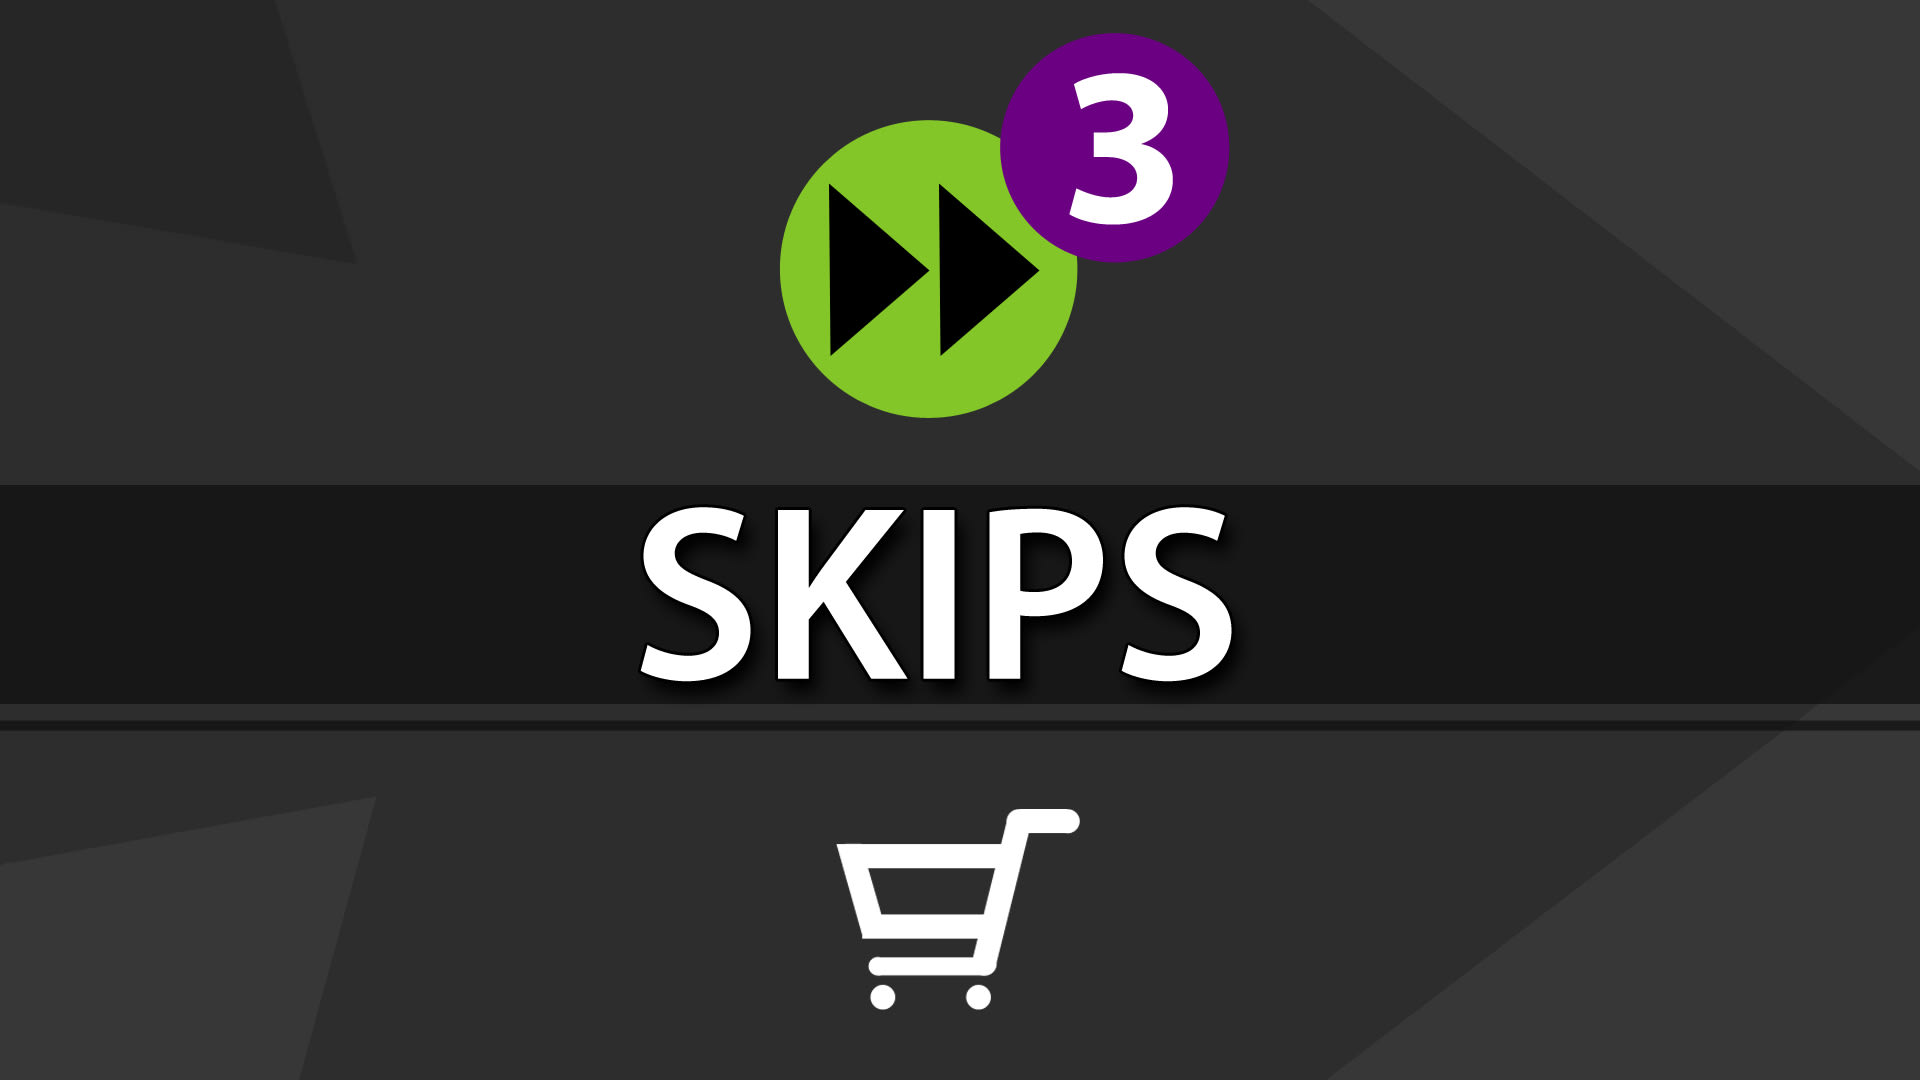 Add 3 more skips for each mode